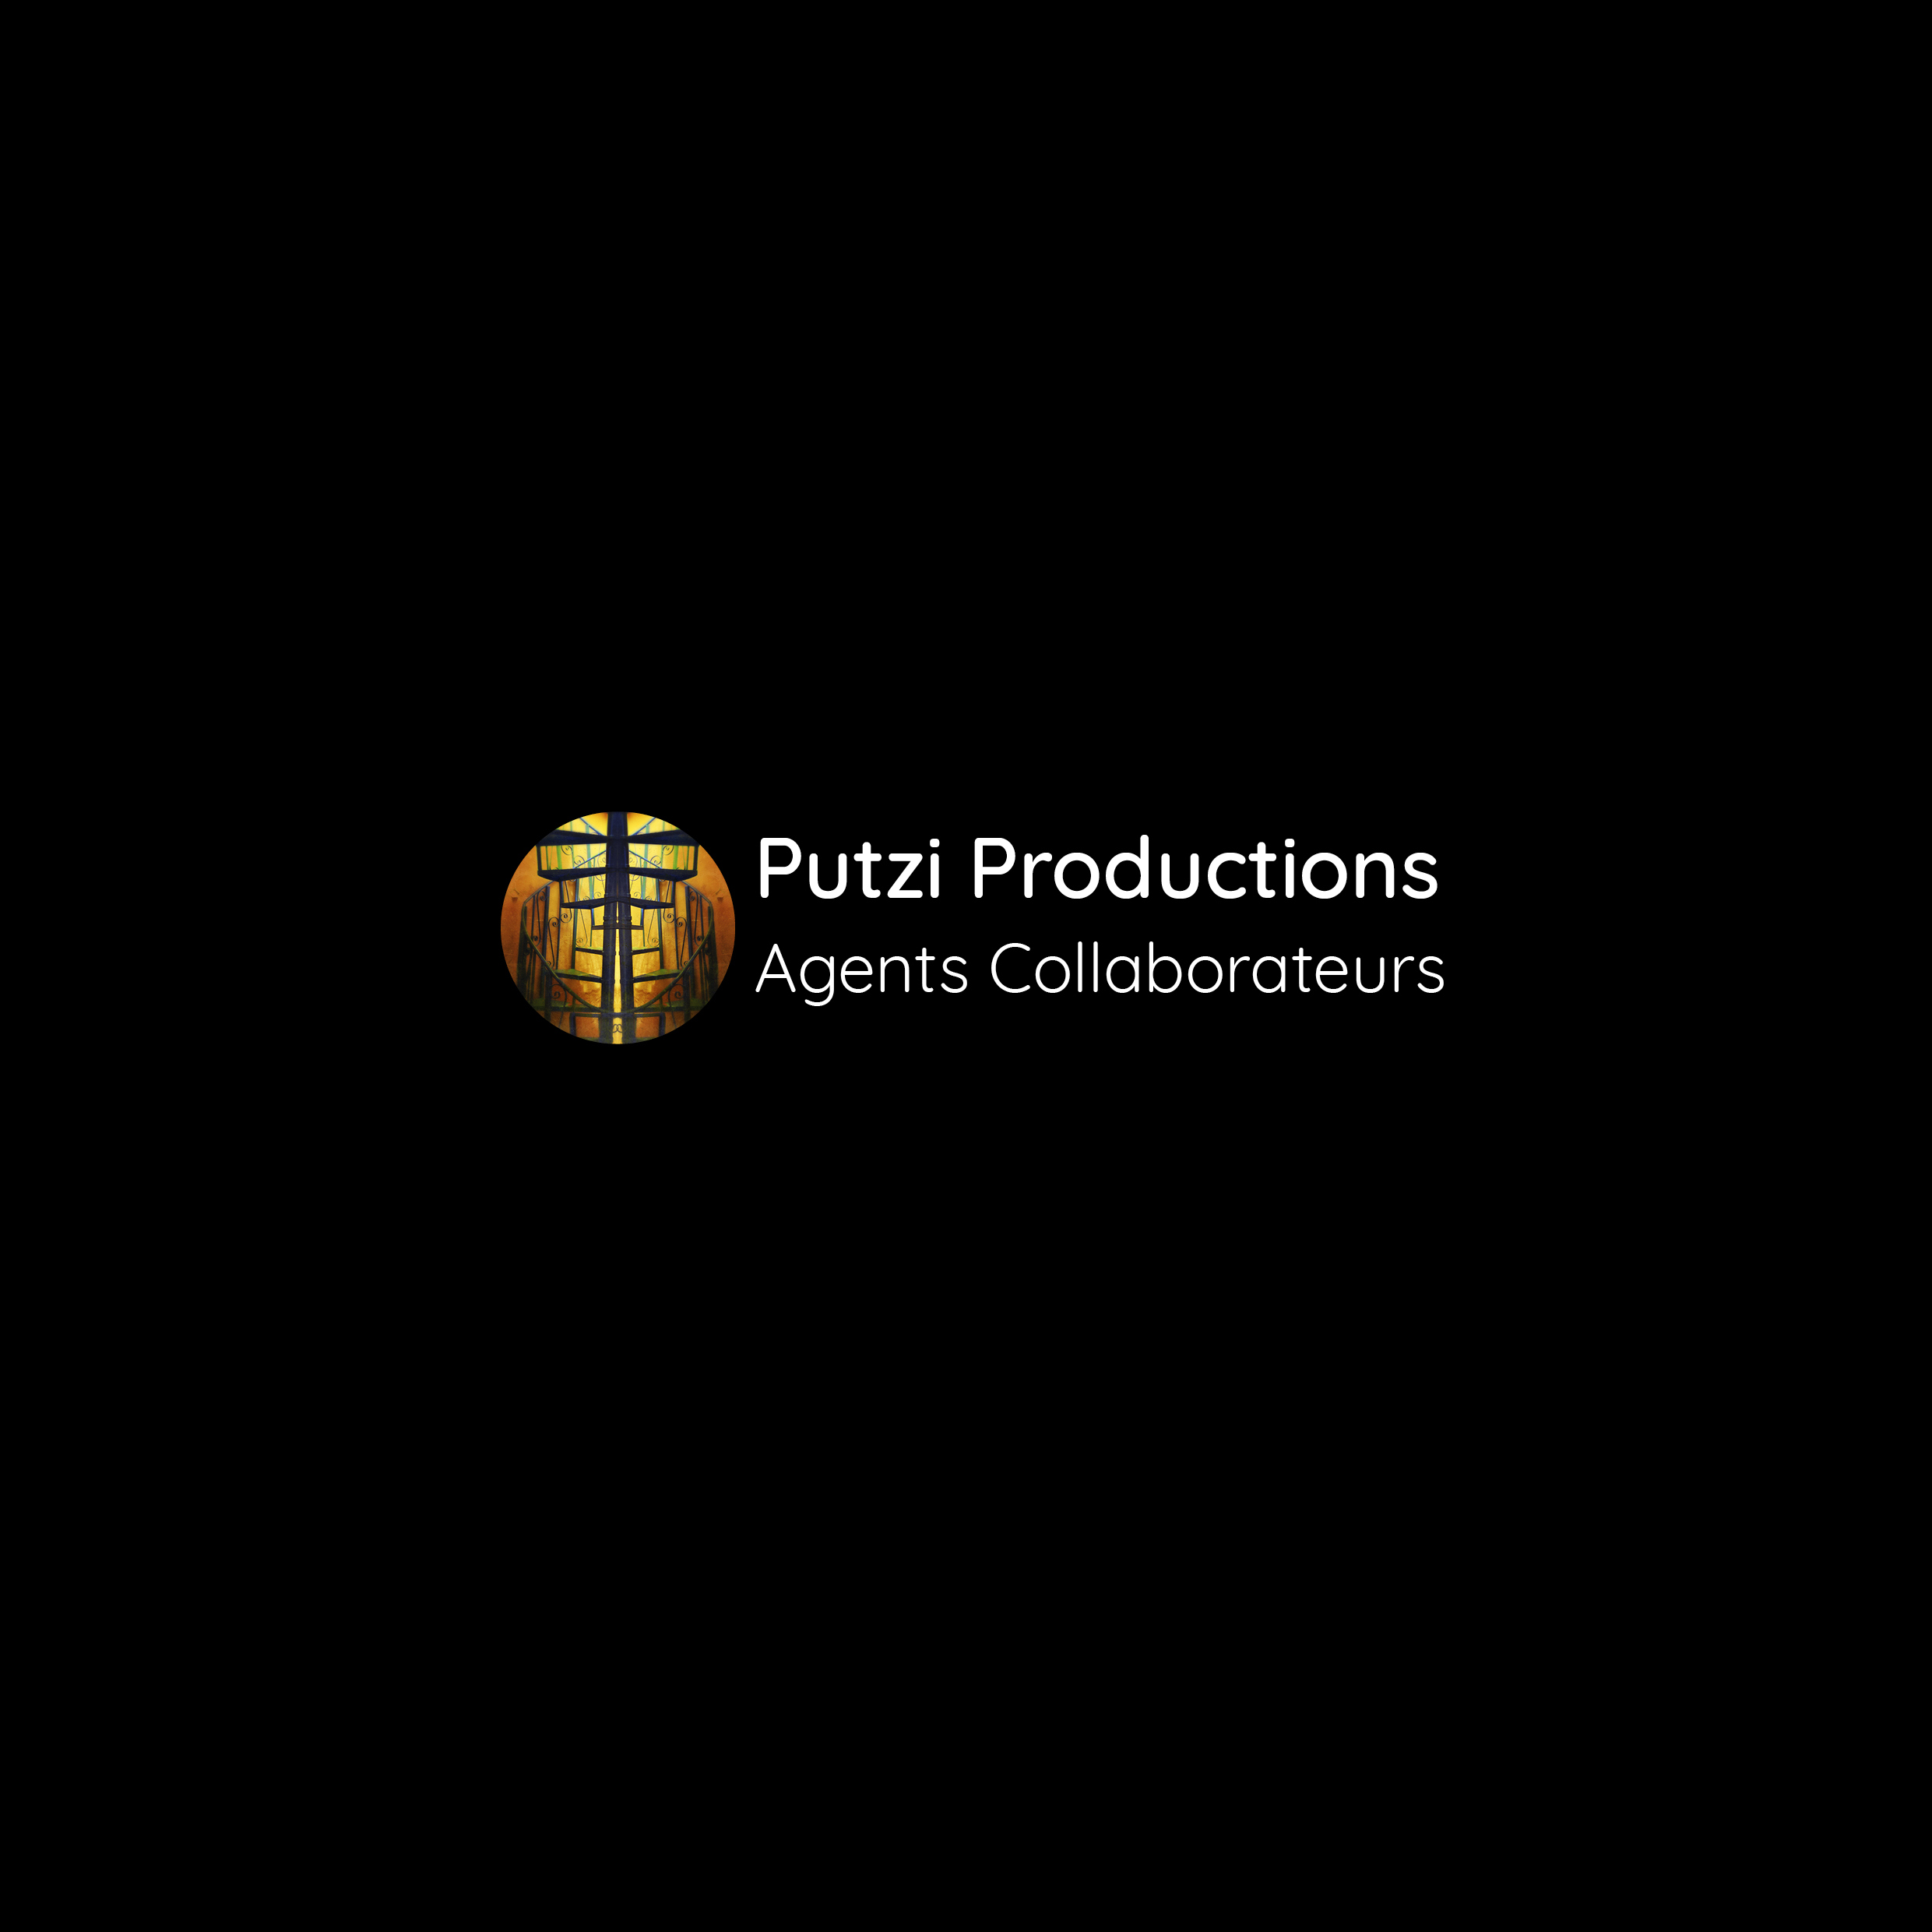 telepictures productions